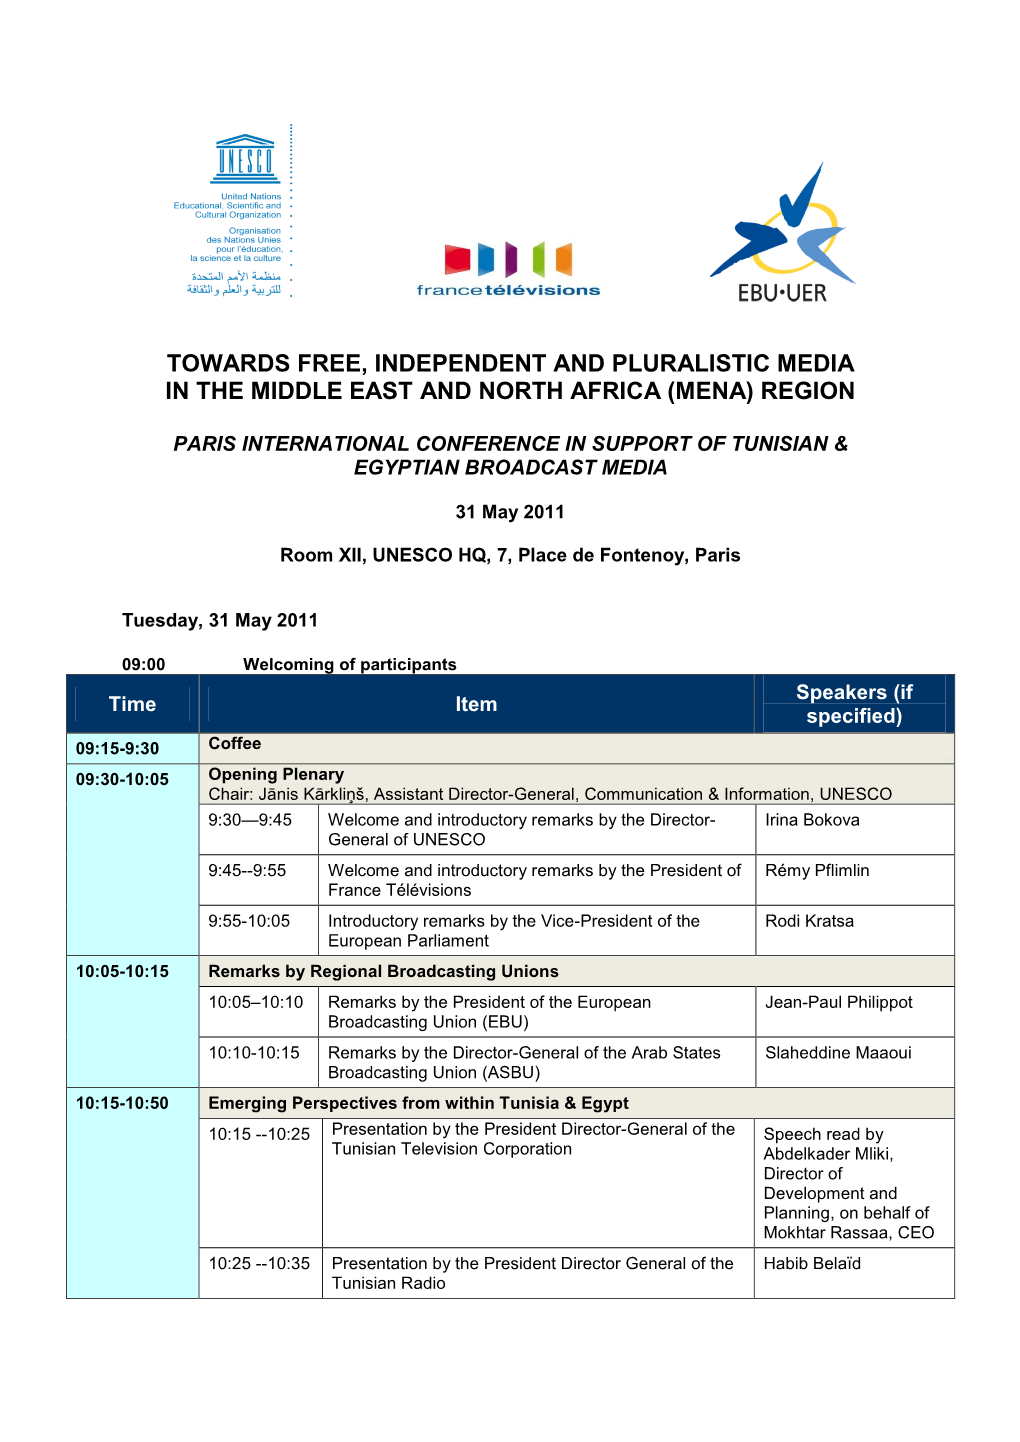 Towards Free, Independent and Pluralistic Media in the Middle East and North Africa (Mena) Region